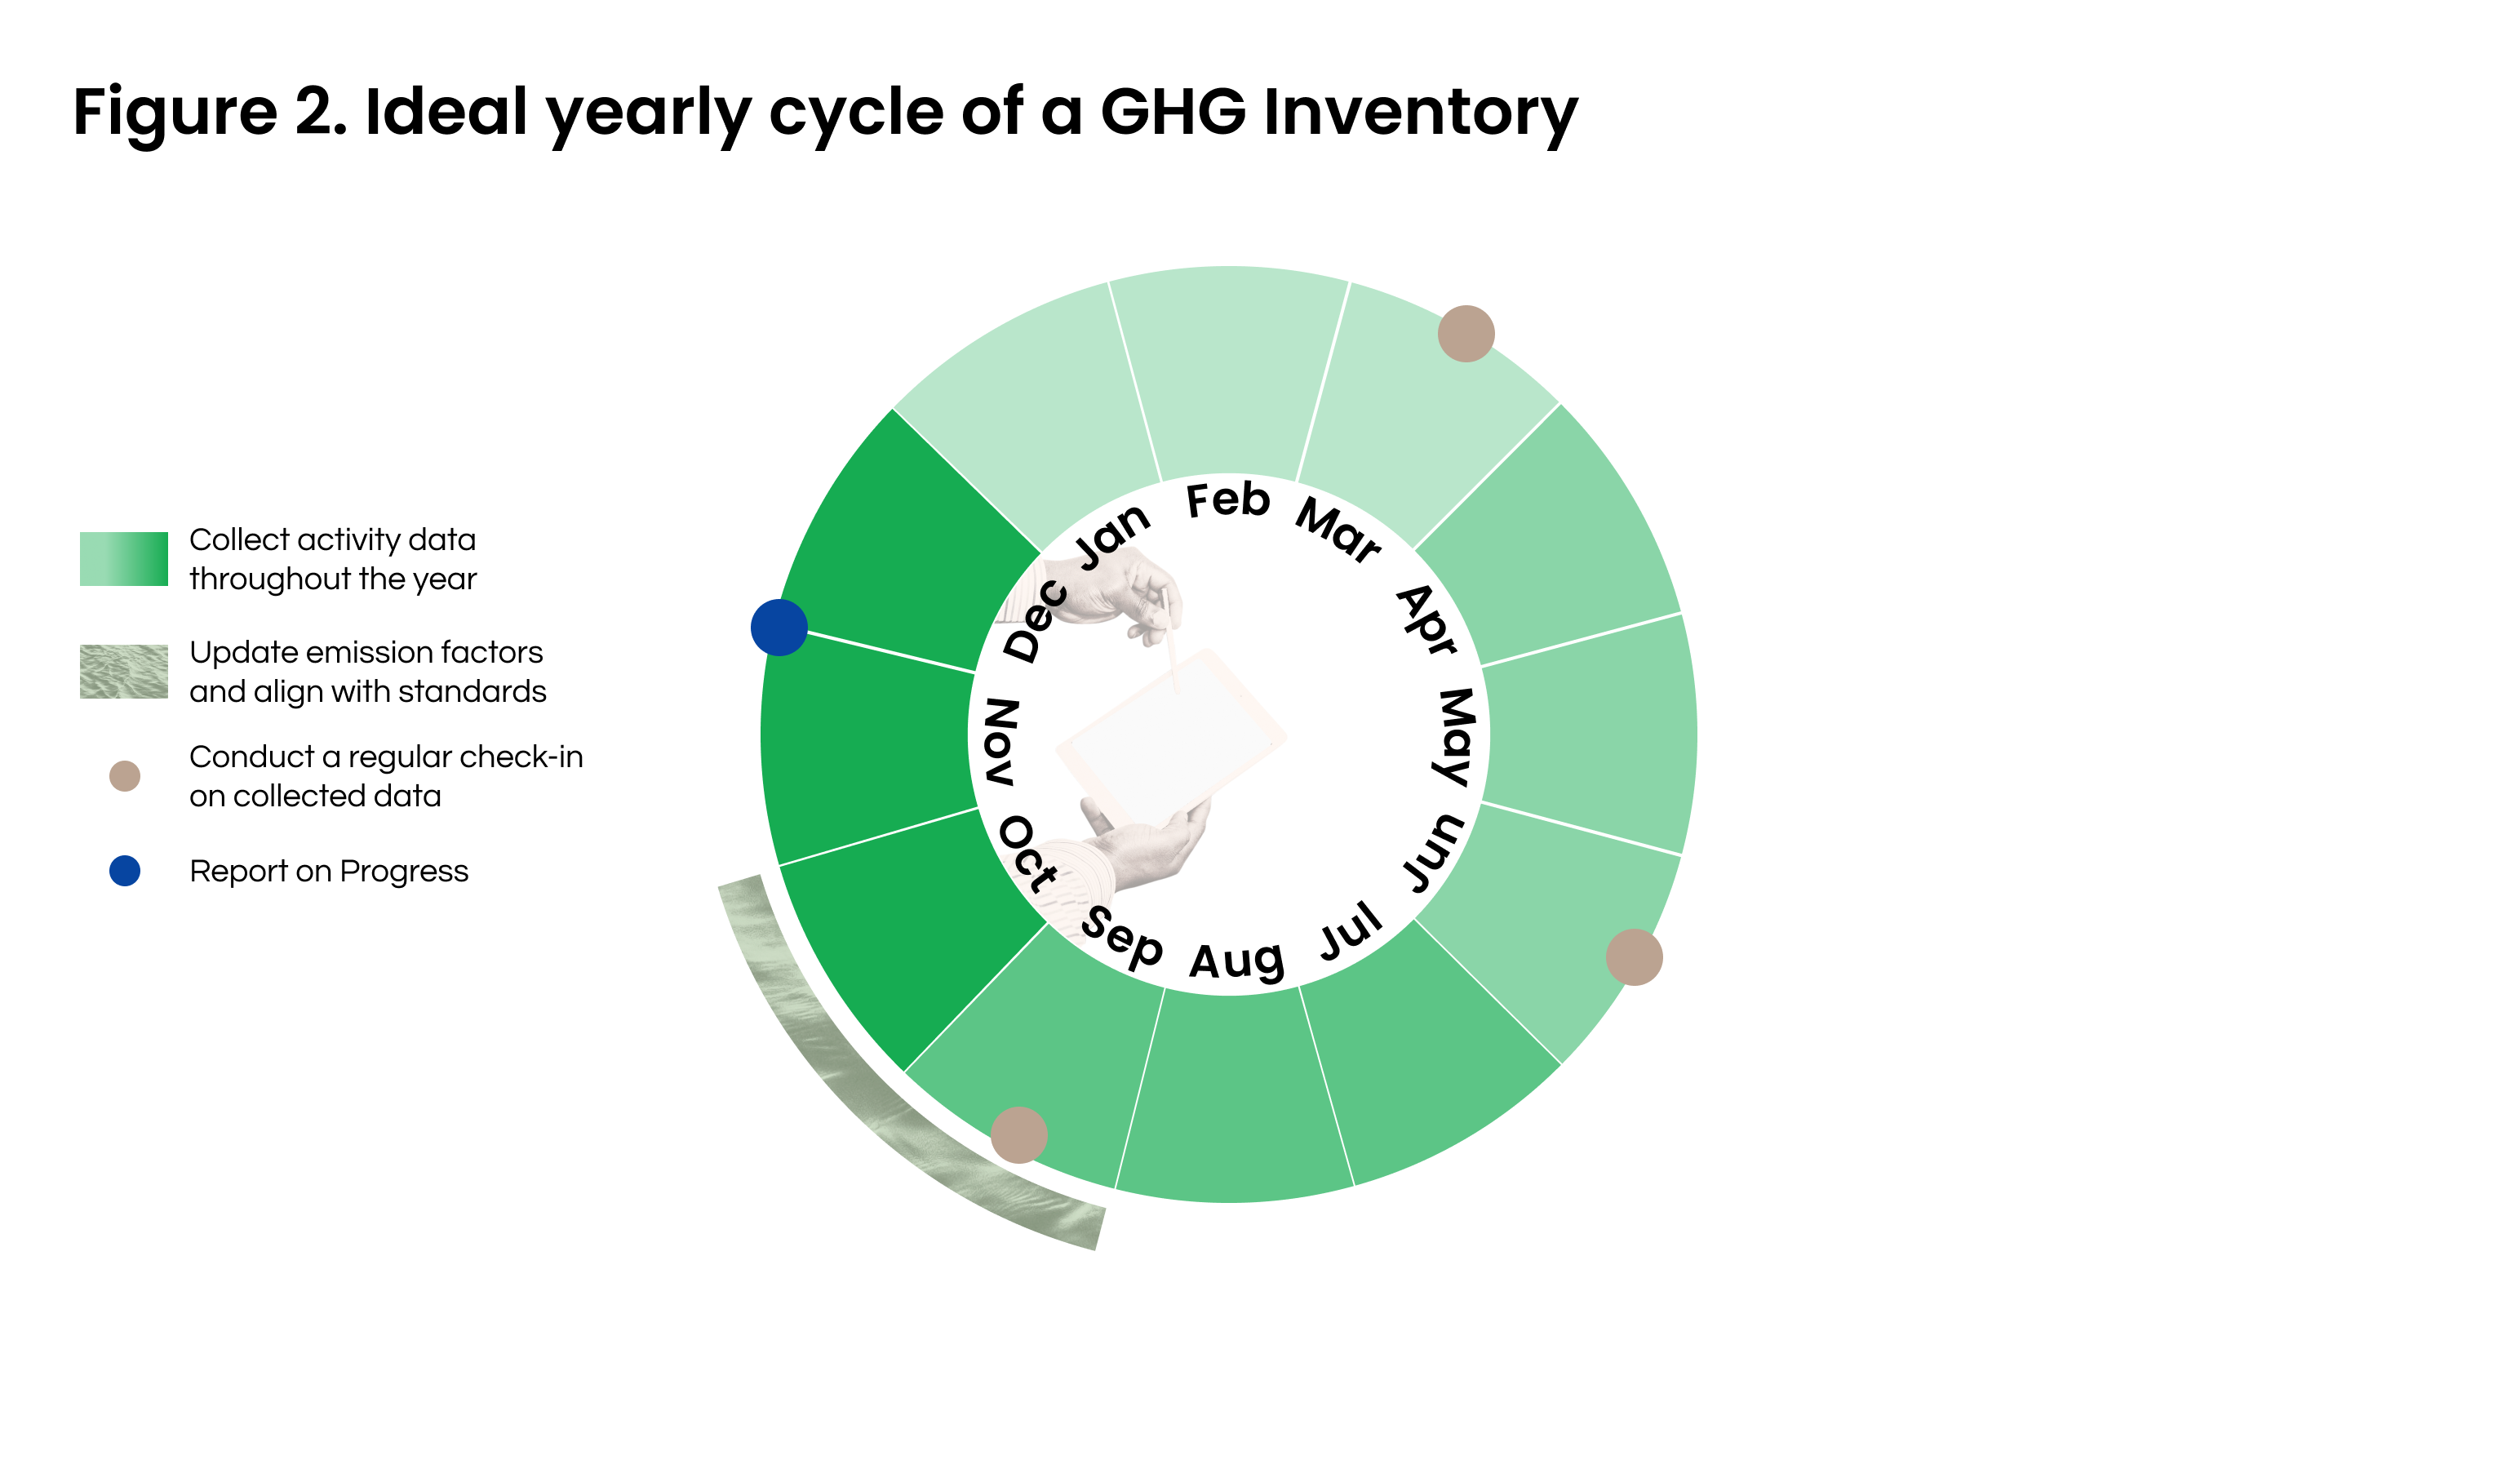 GHG Inventory Yearly Process